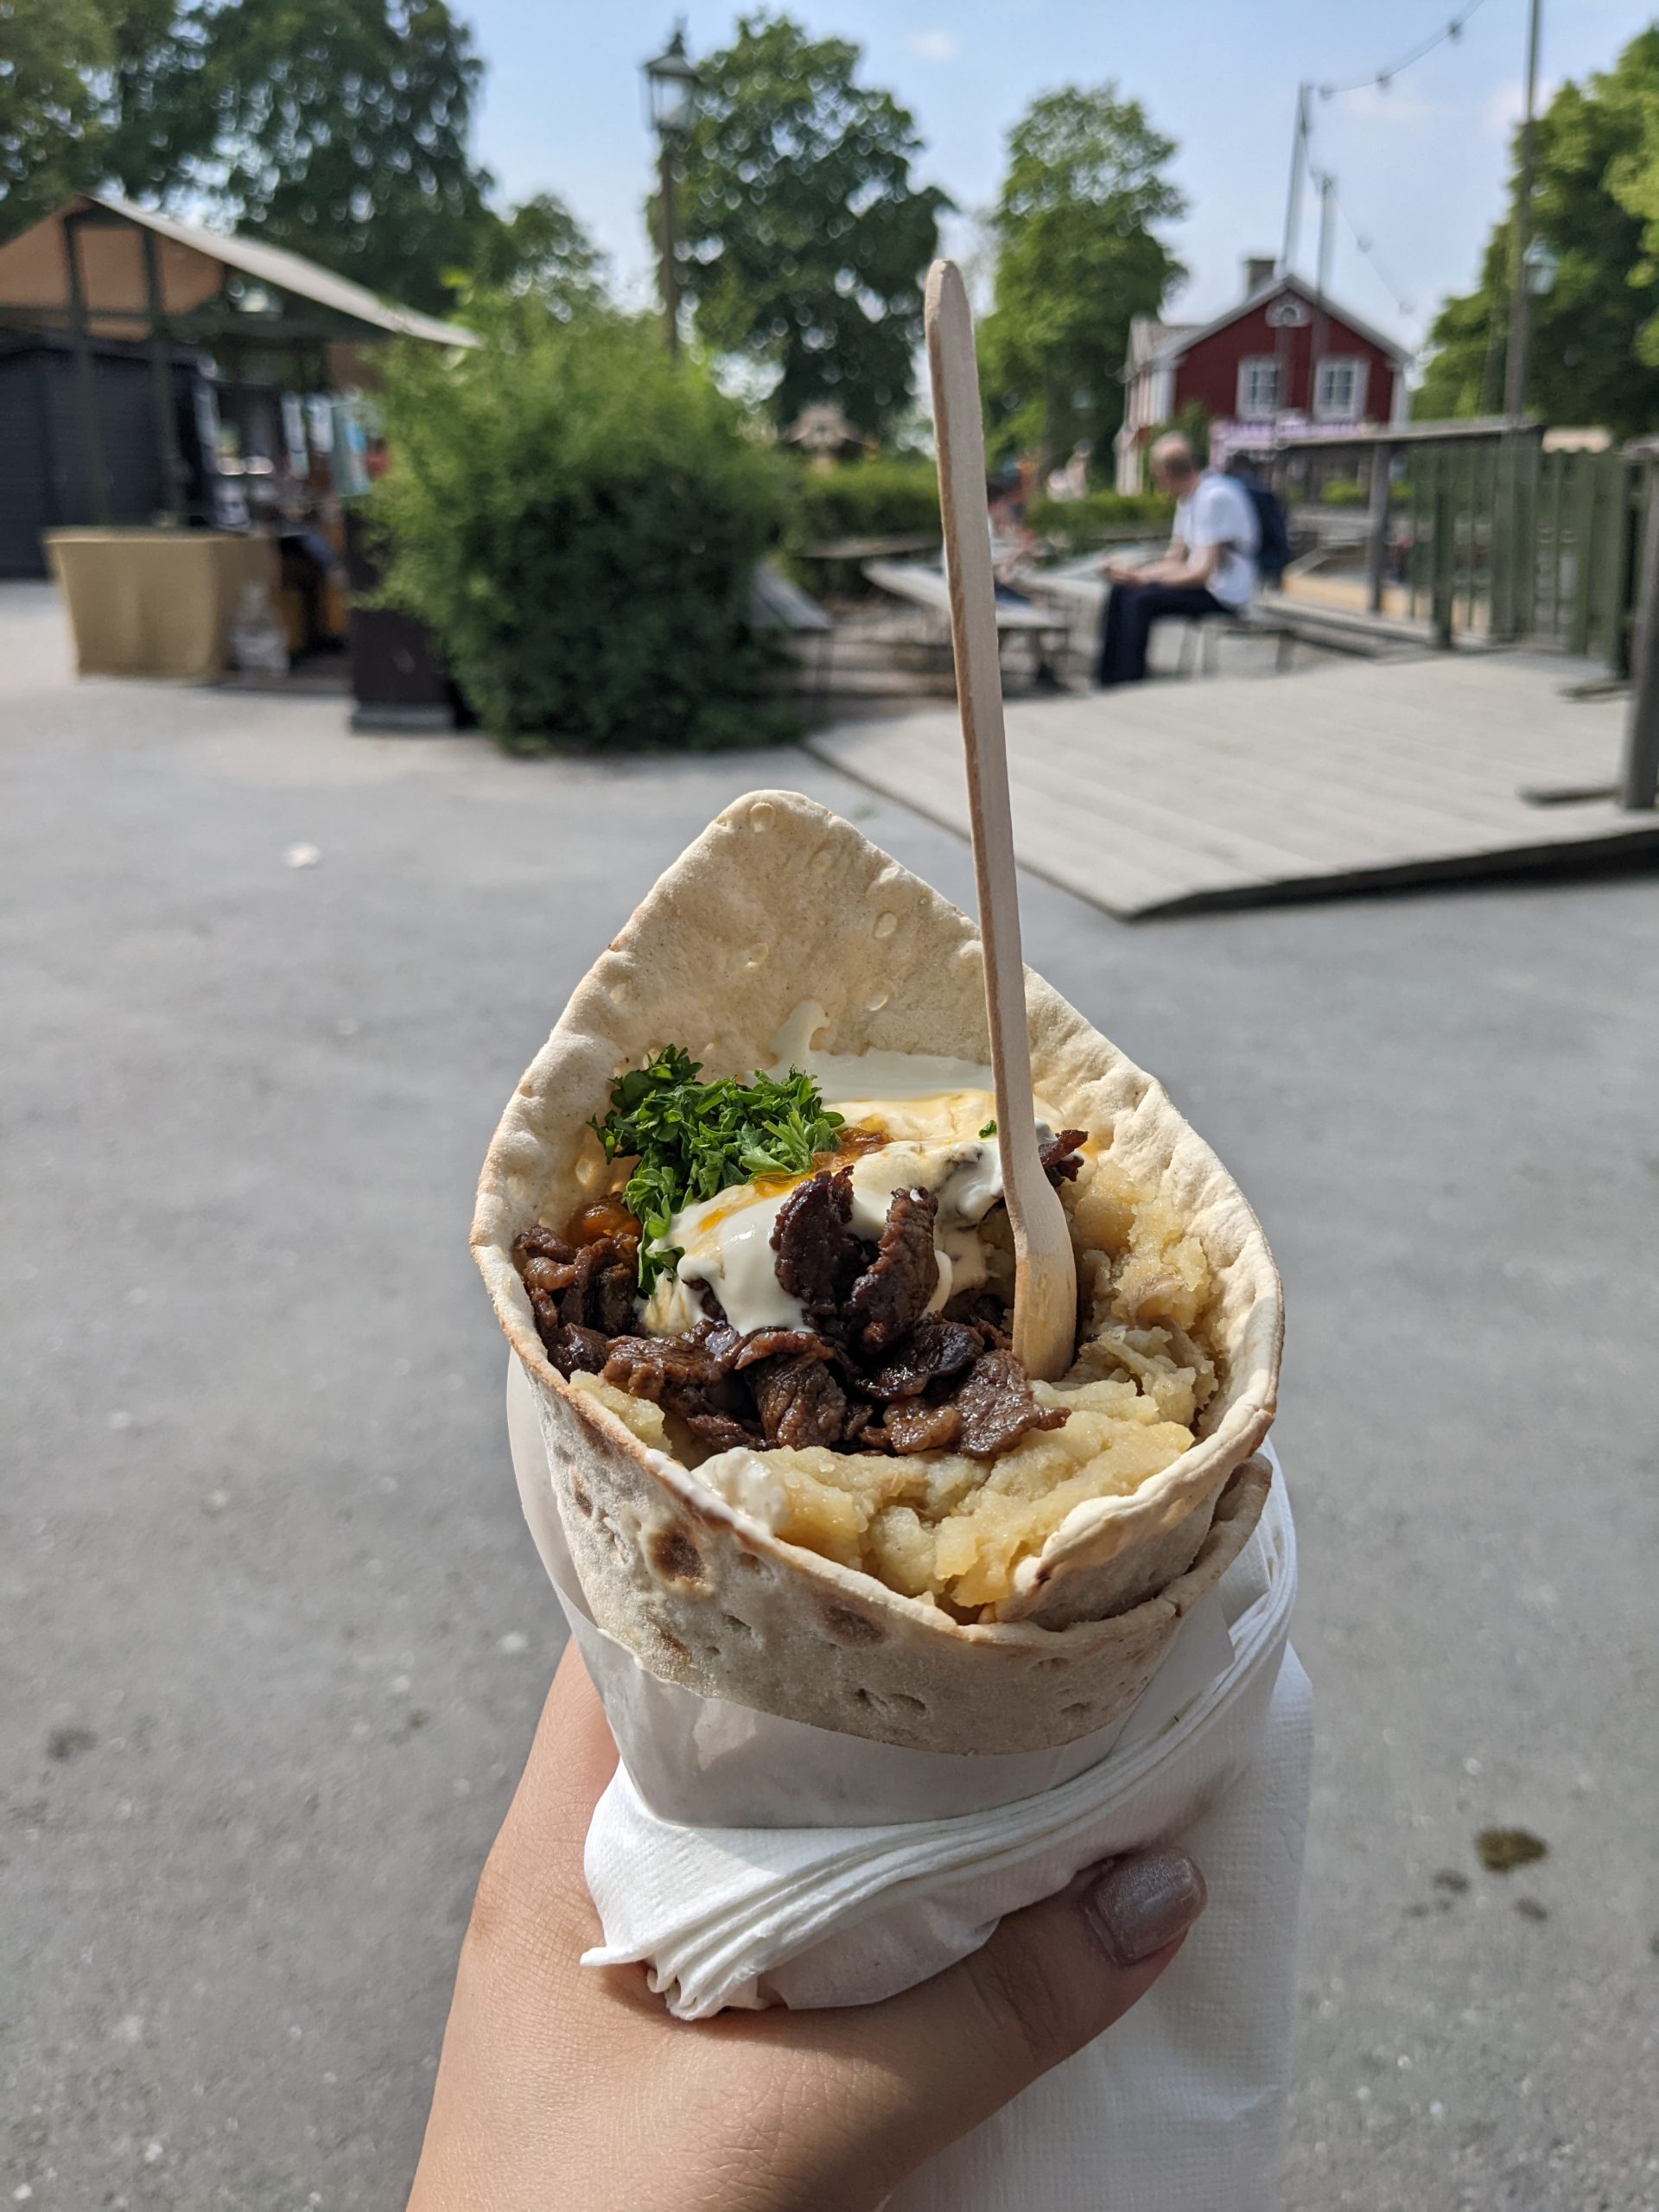 A wrap filled with meat and mashed potatoes